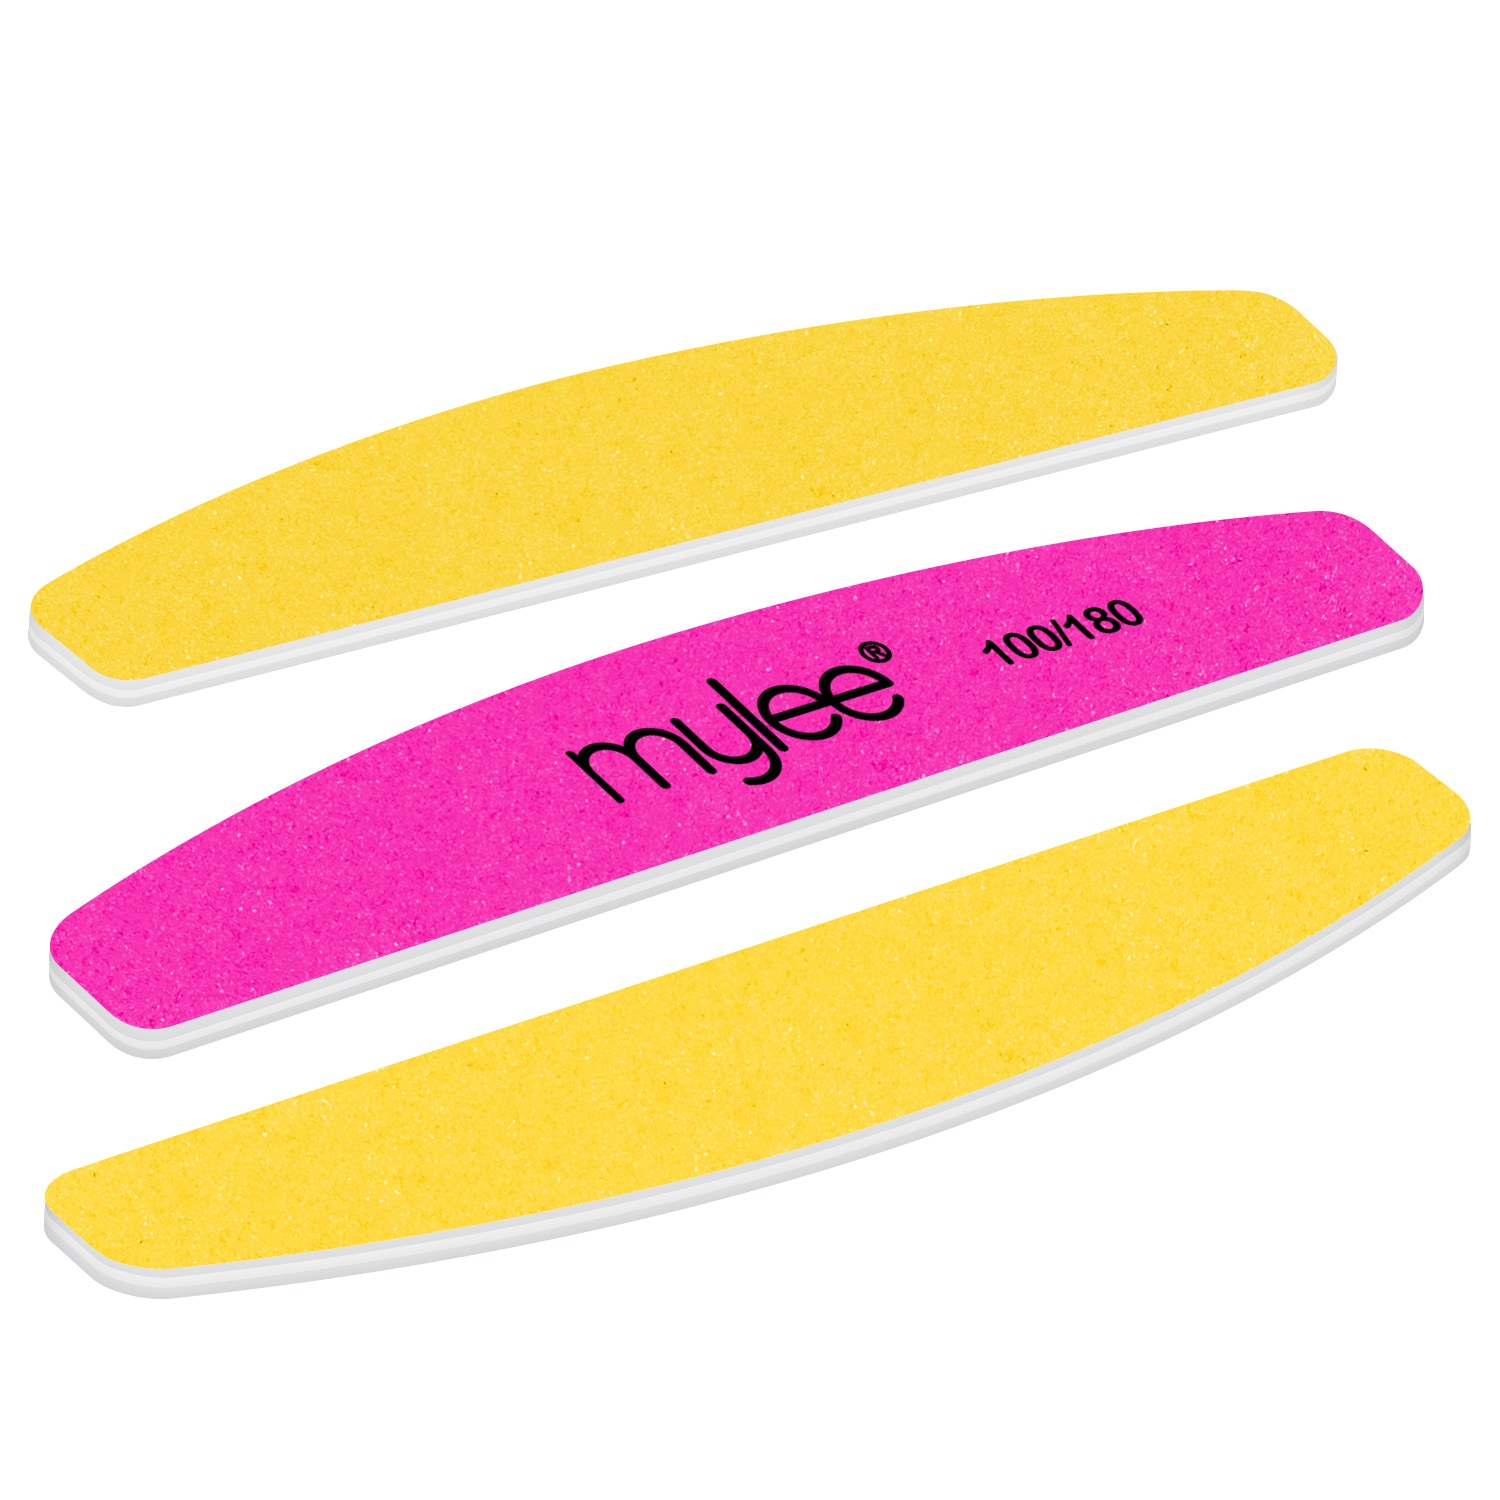 MYLEE Crescent nail files, 3 pieces